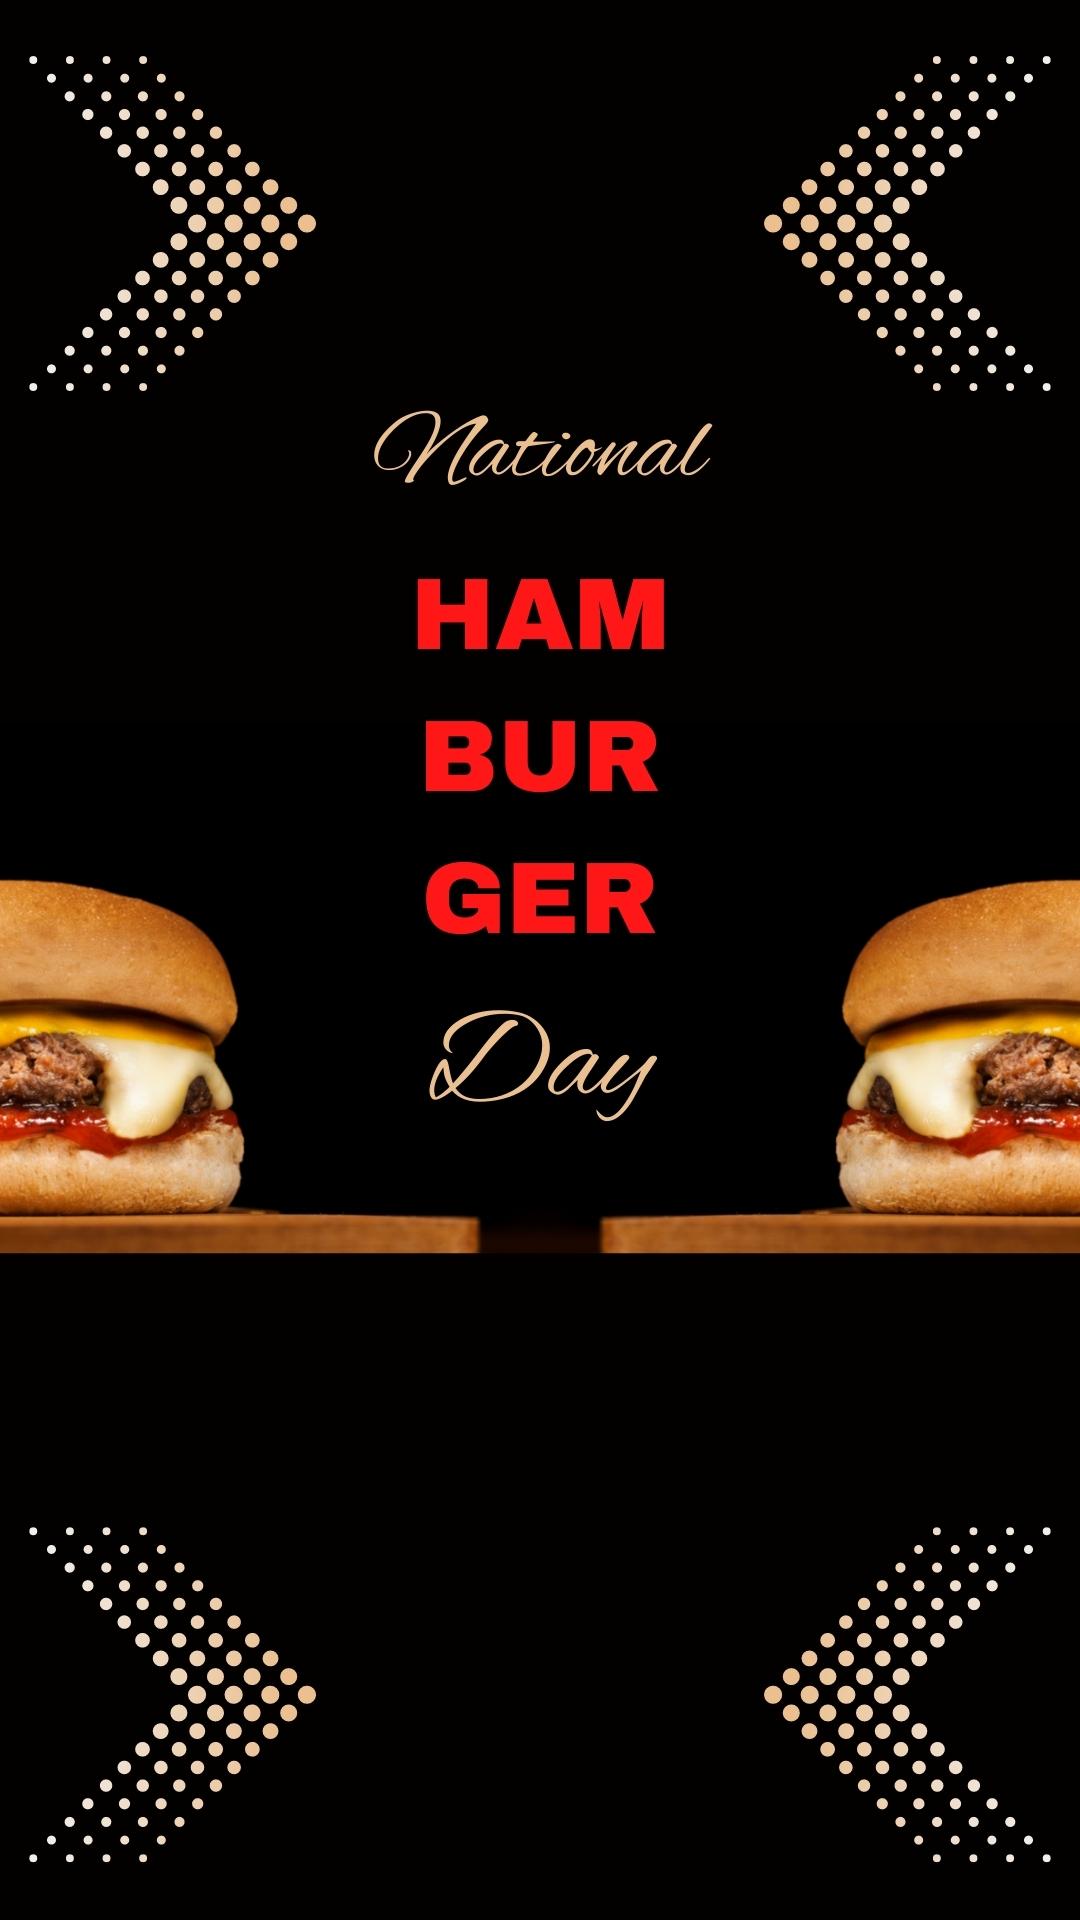 best national hamburger day wishes images for instagram post (42)